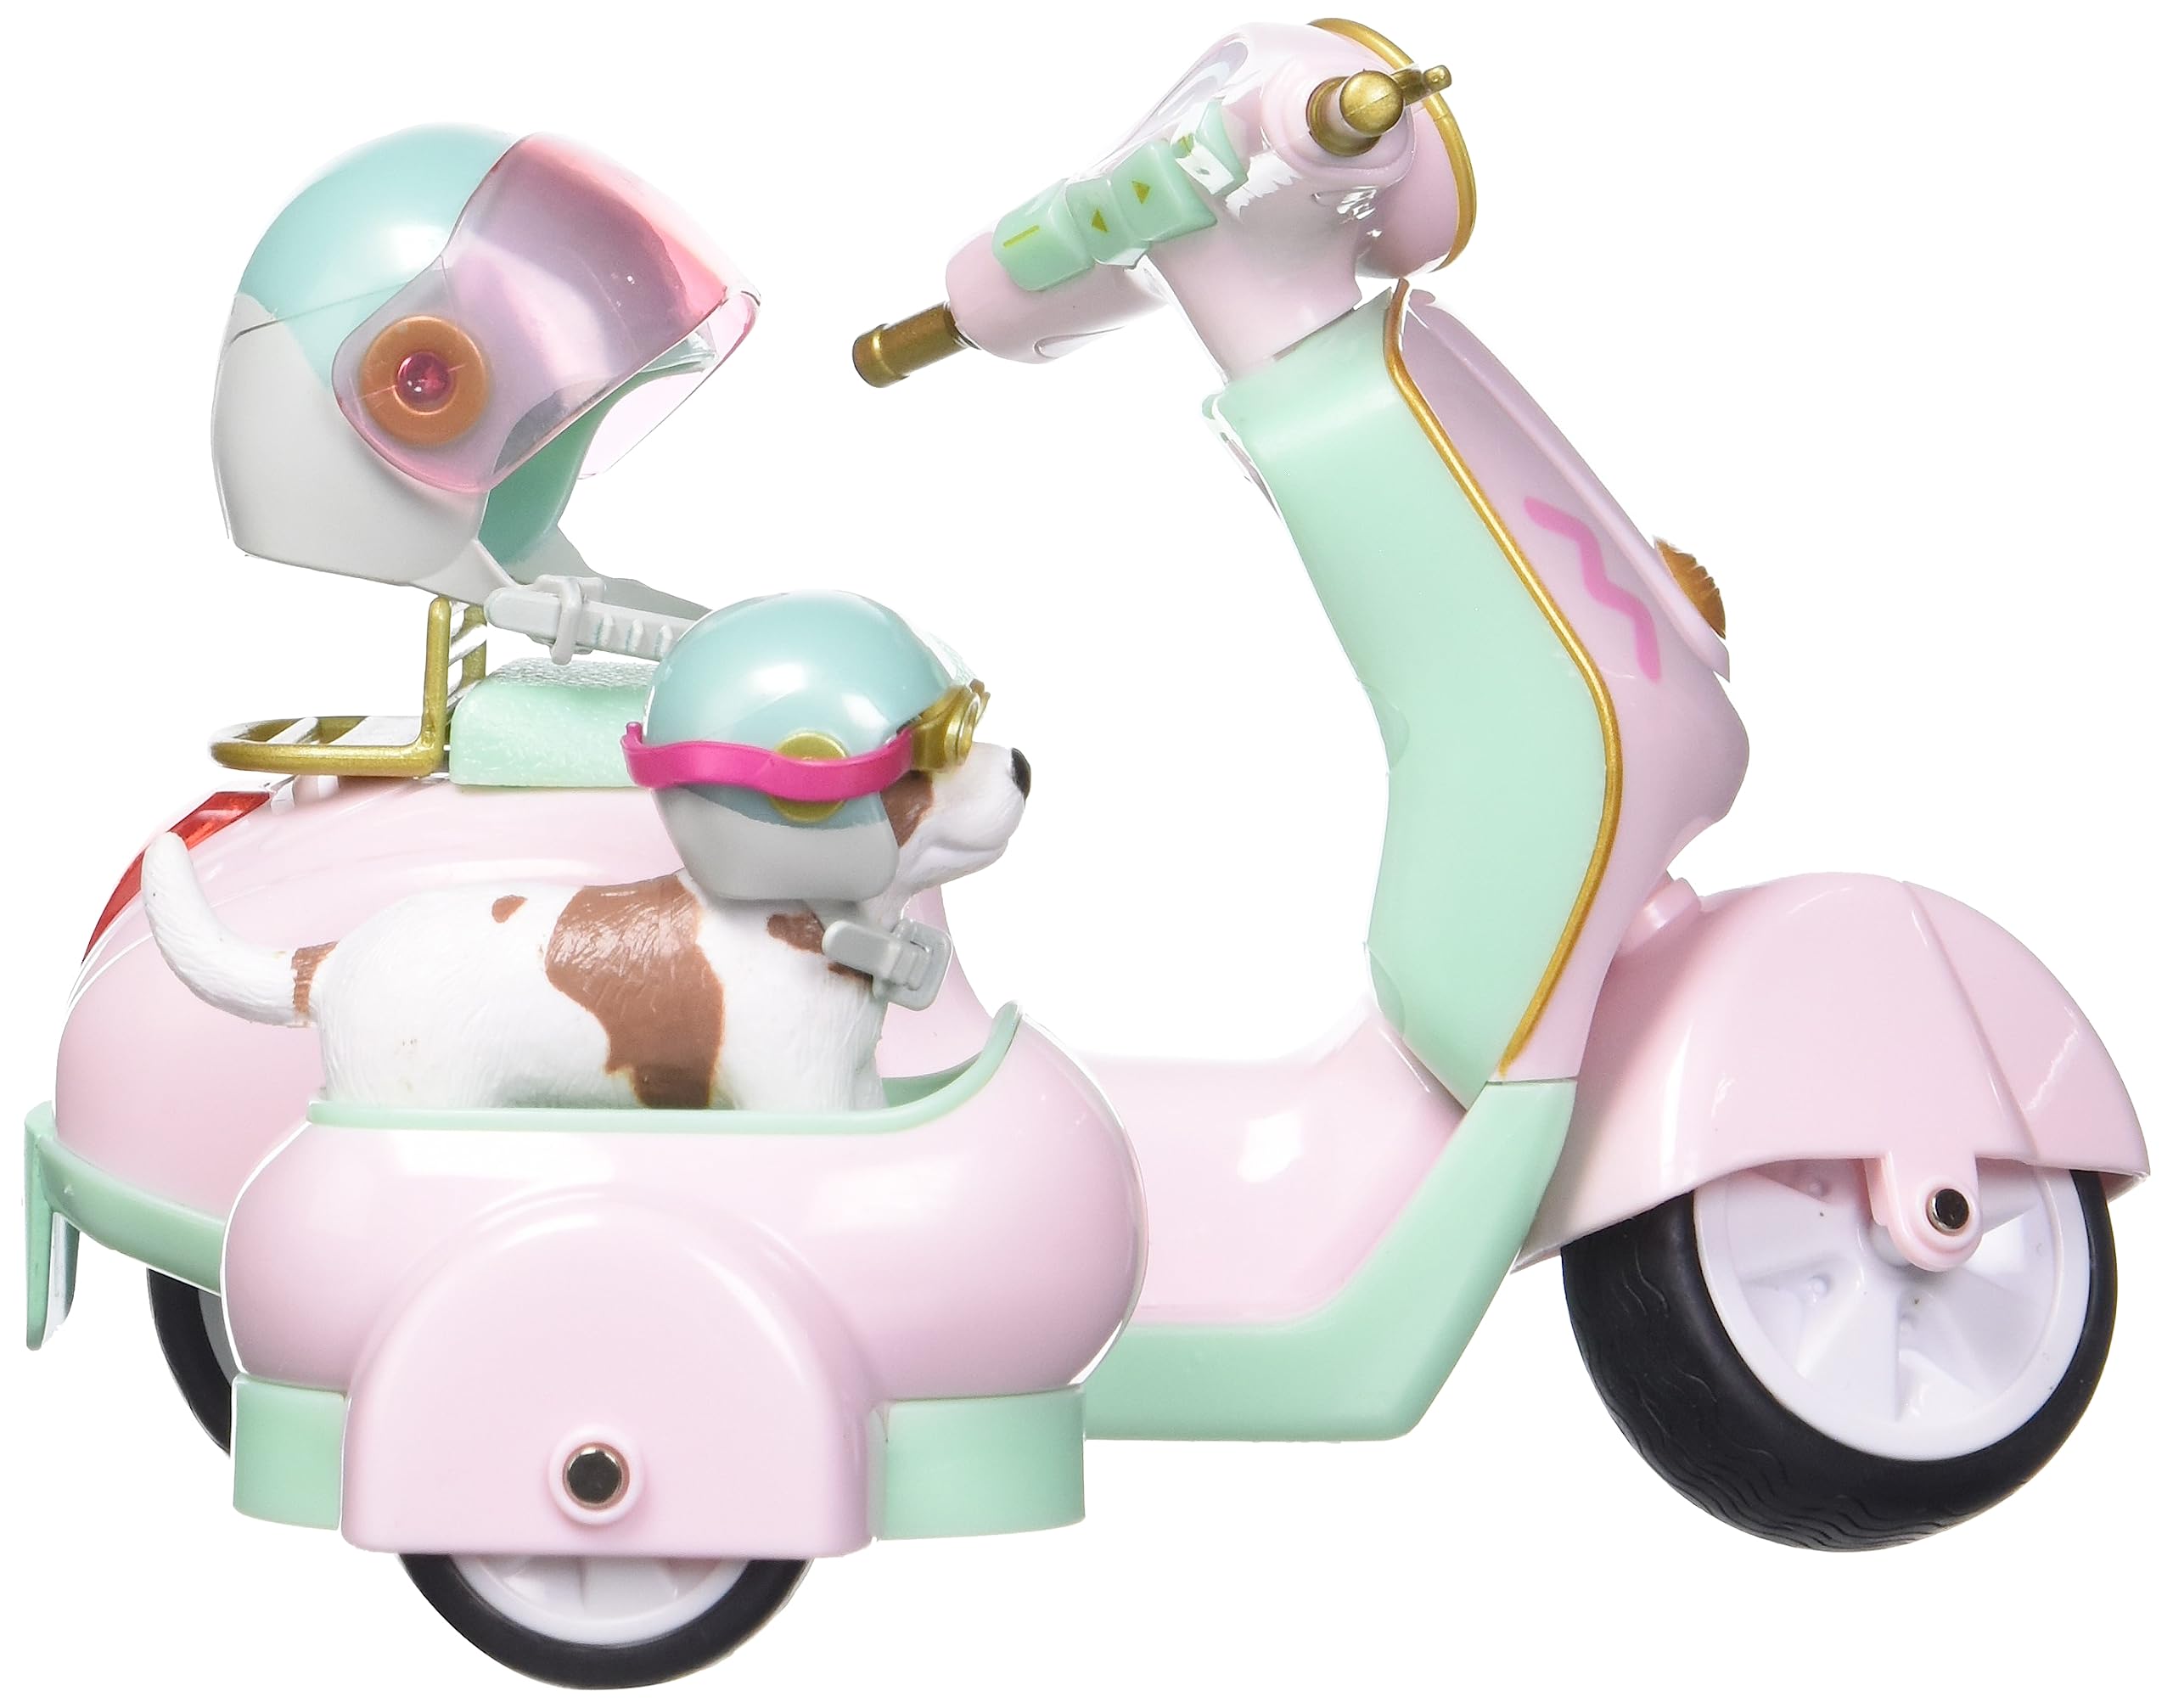 Lori Dolls – Toy Scooter for Mini Dolls – Vehicle with Accessories – Toy Dog with Helmet & Goggles – Working Lights & Sounds – Let’s Go for a Spin Scooter – 3 Years +